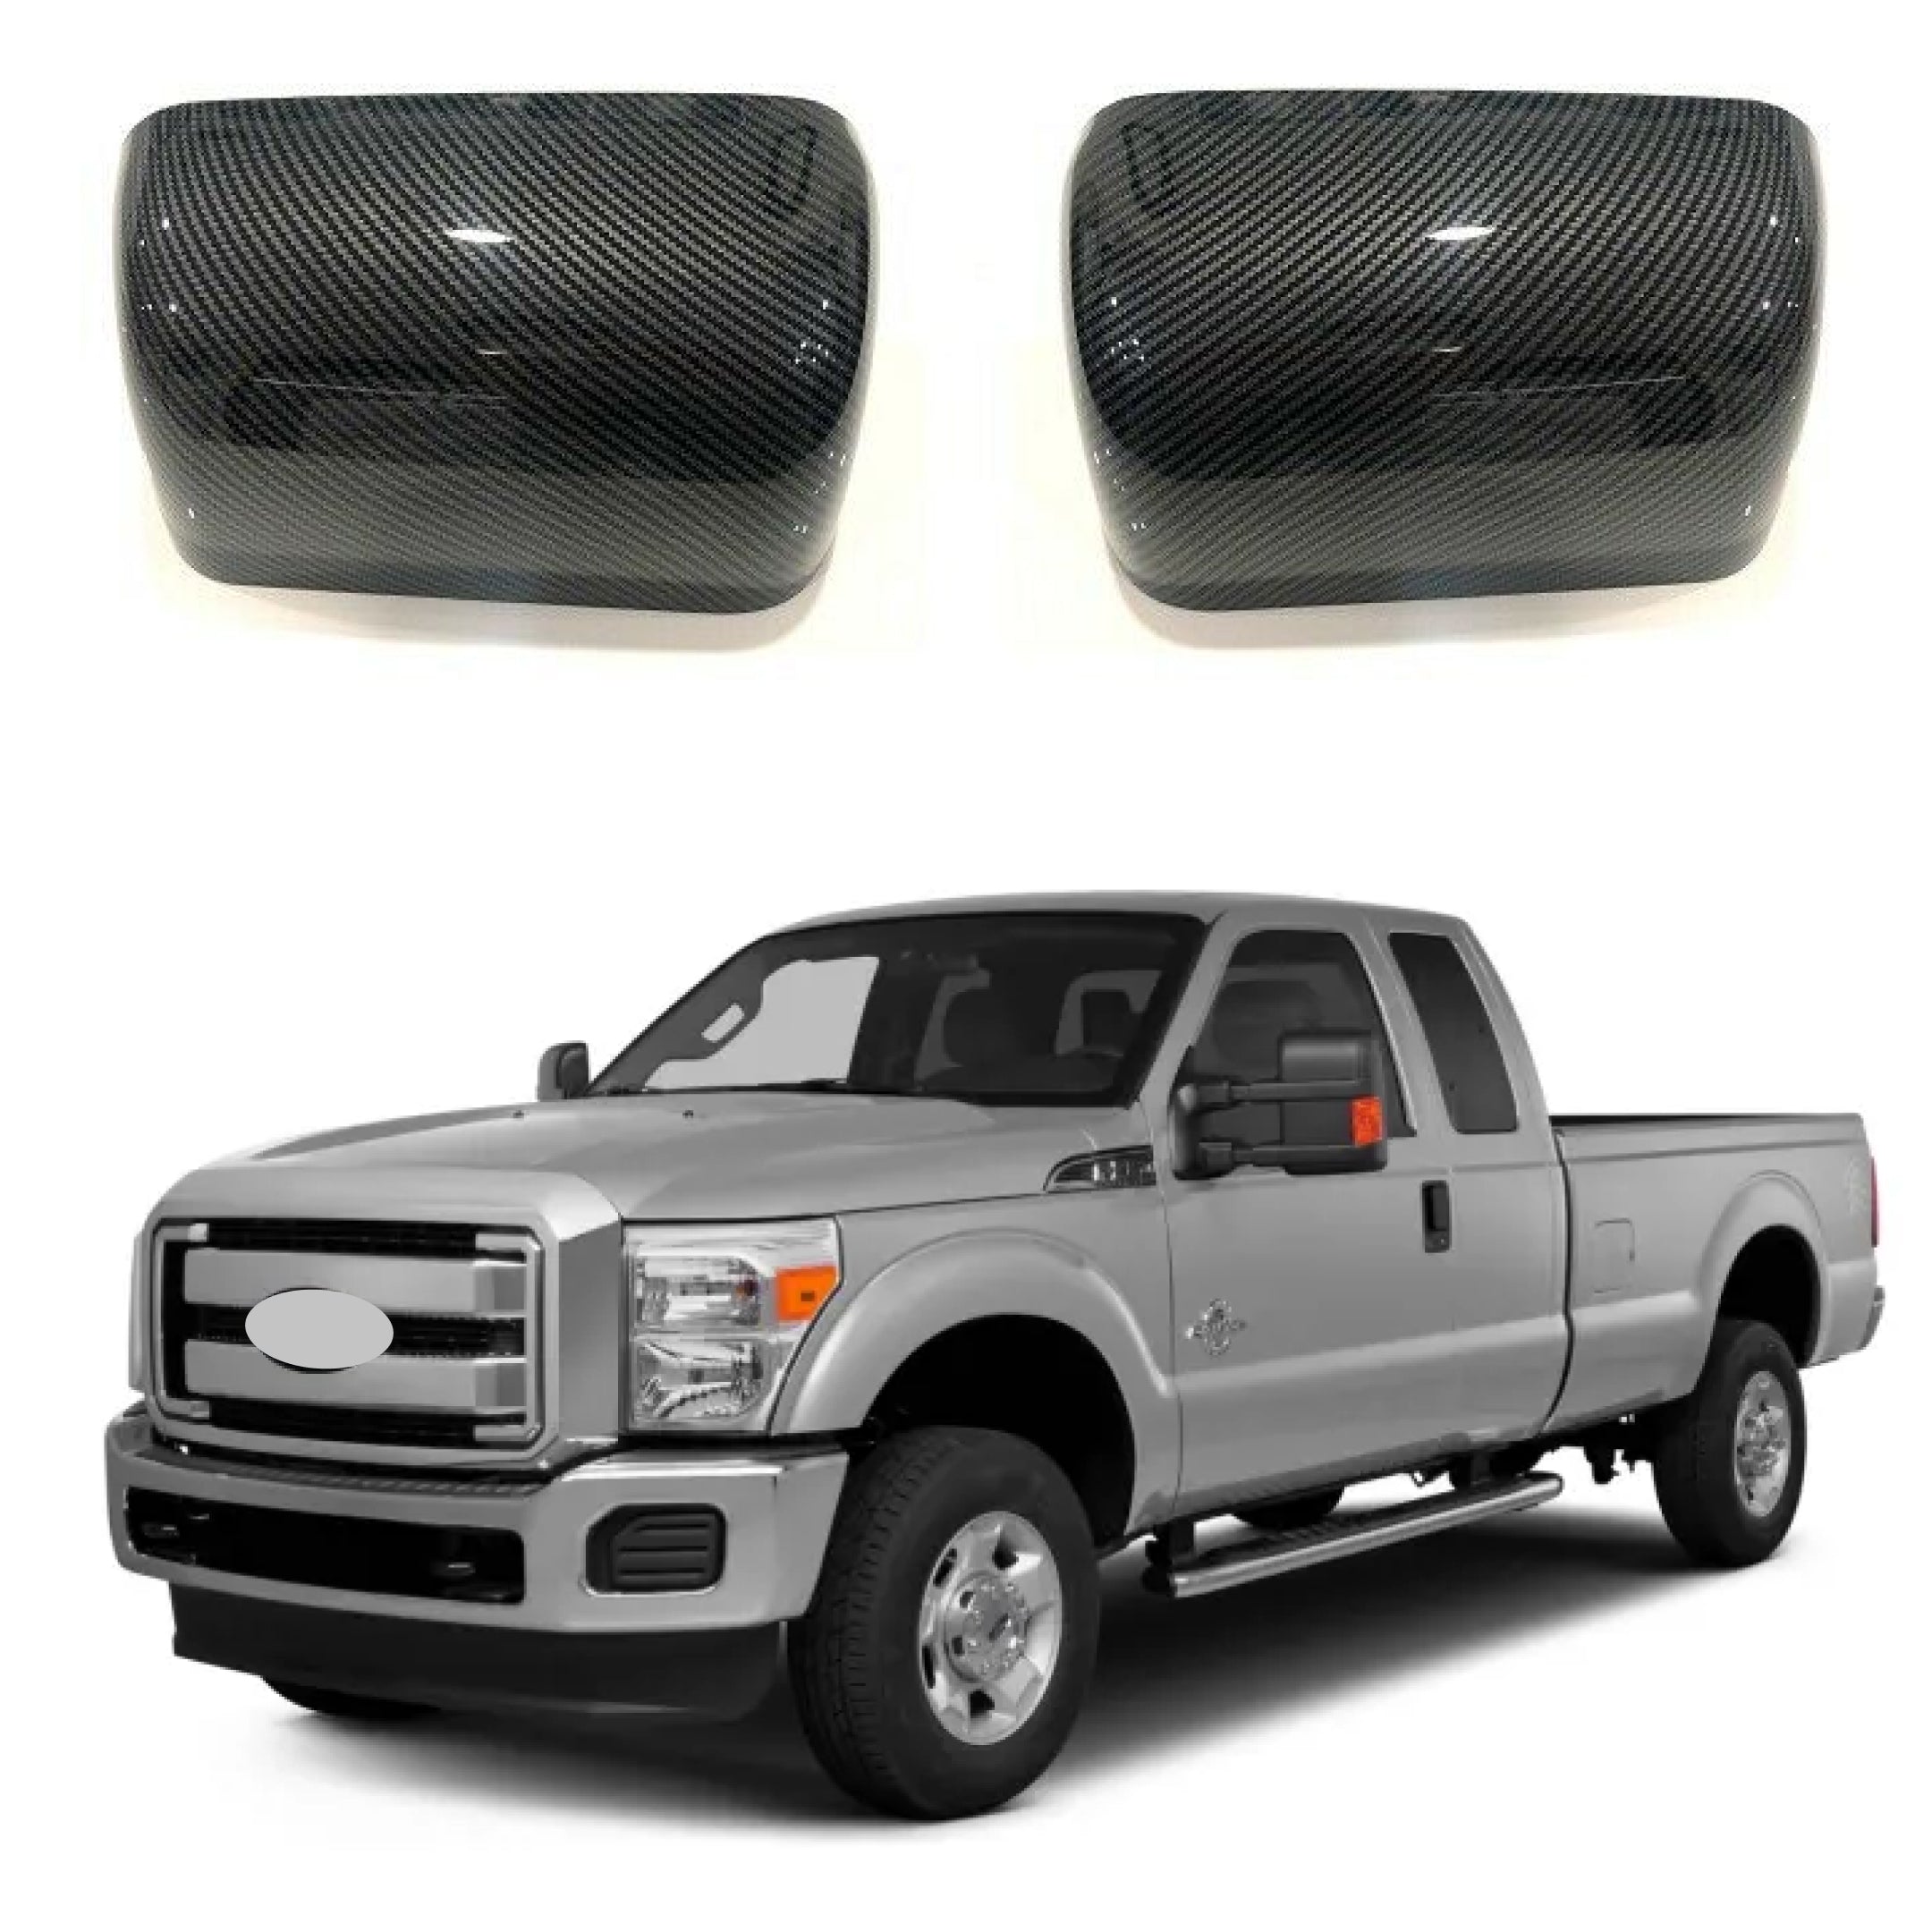 Fits 2008-2015 Ford F250 F350 F450 Rear View Mirror Covers Overlay (Carbon Fiber Print)